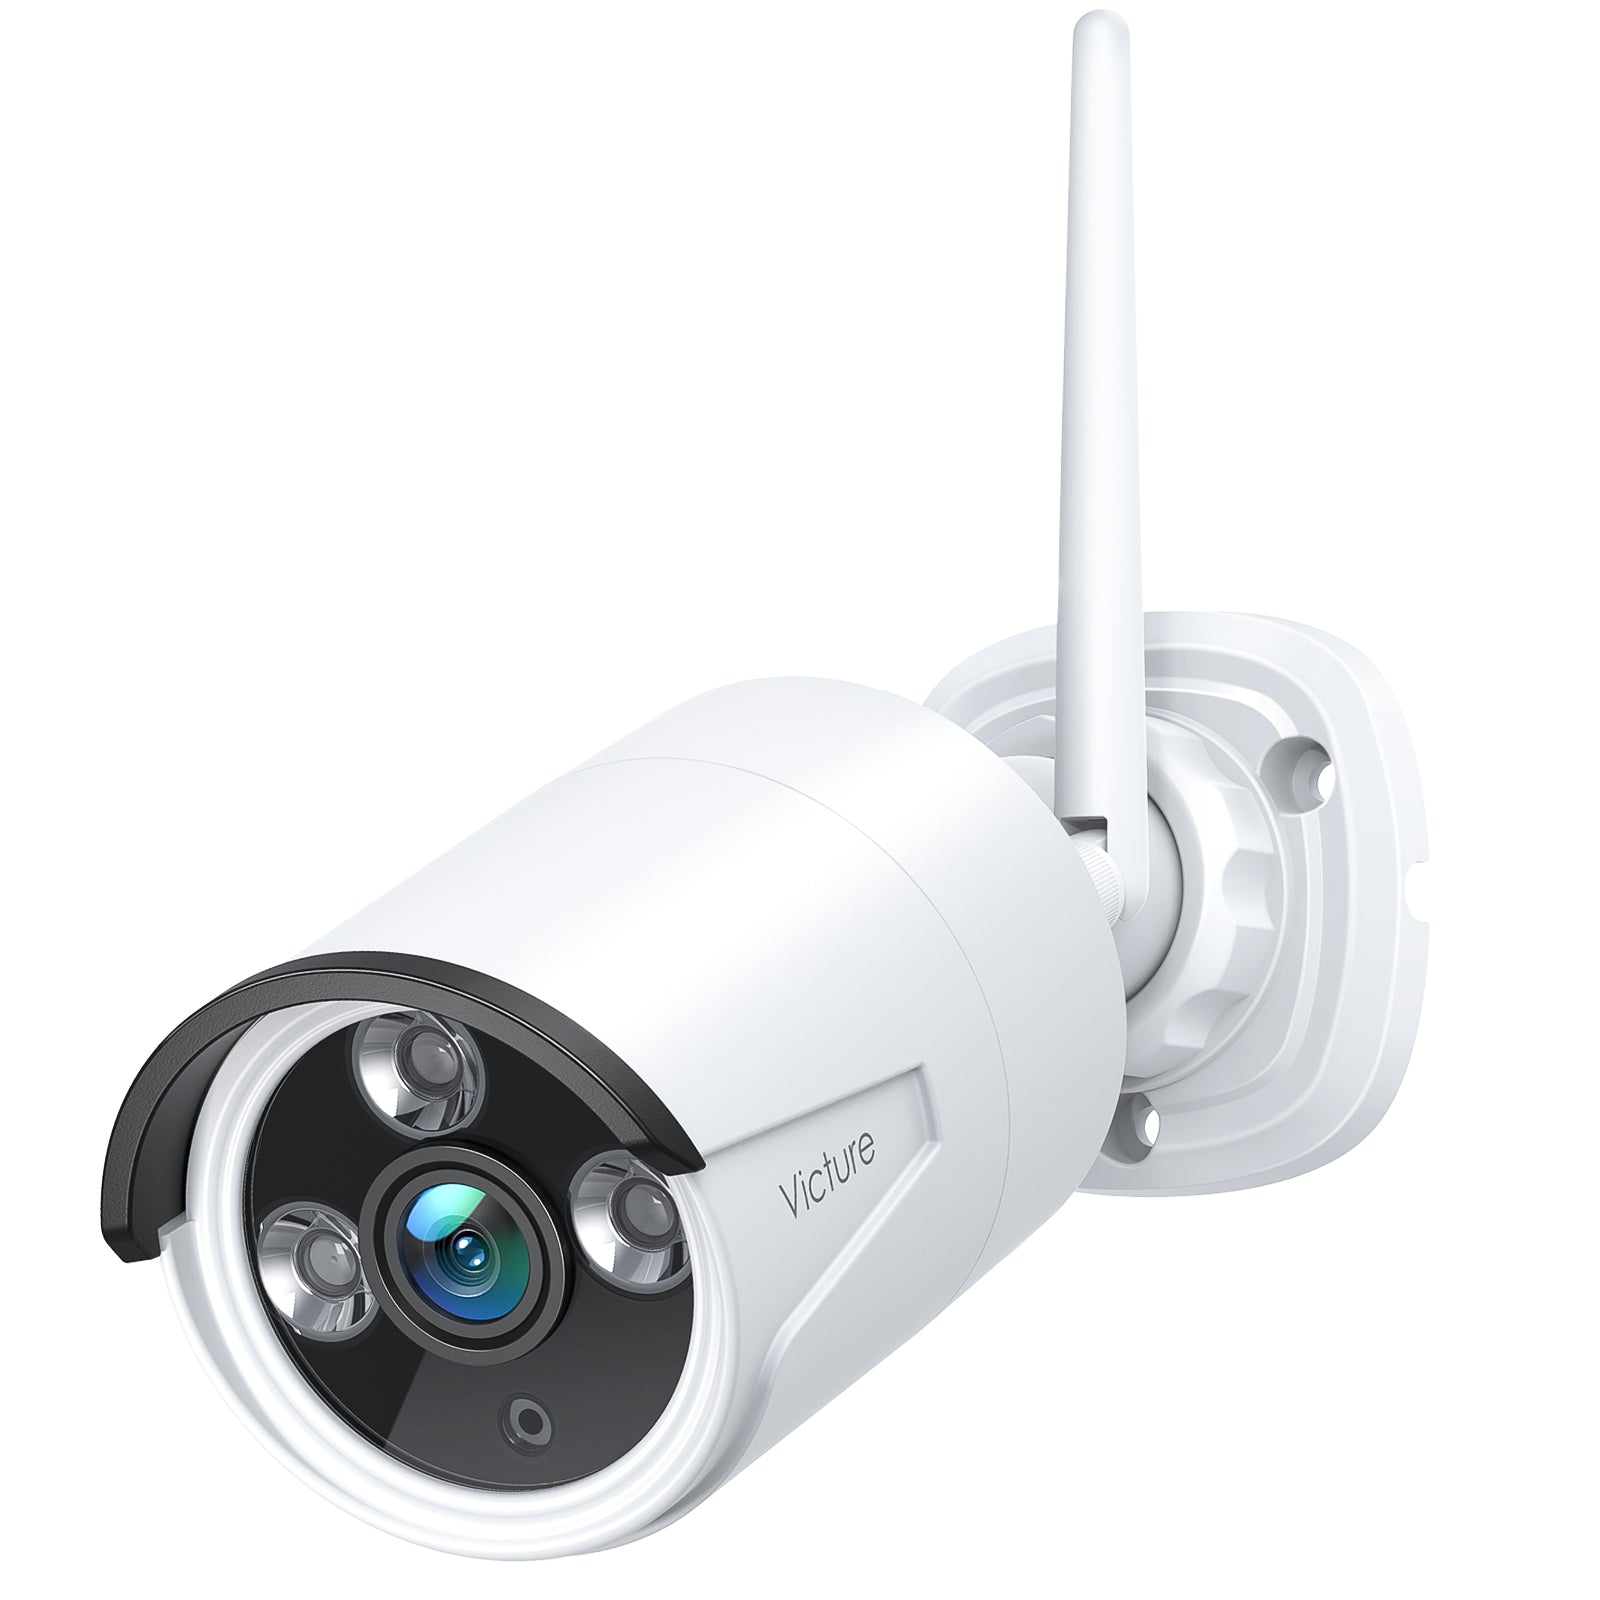 Victure NK200 Security Camera